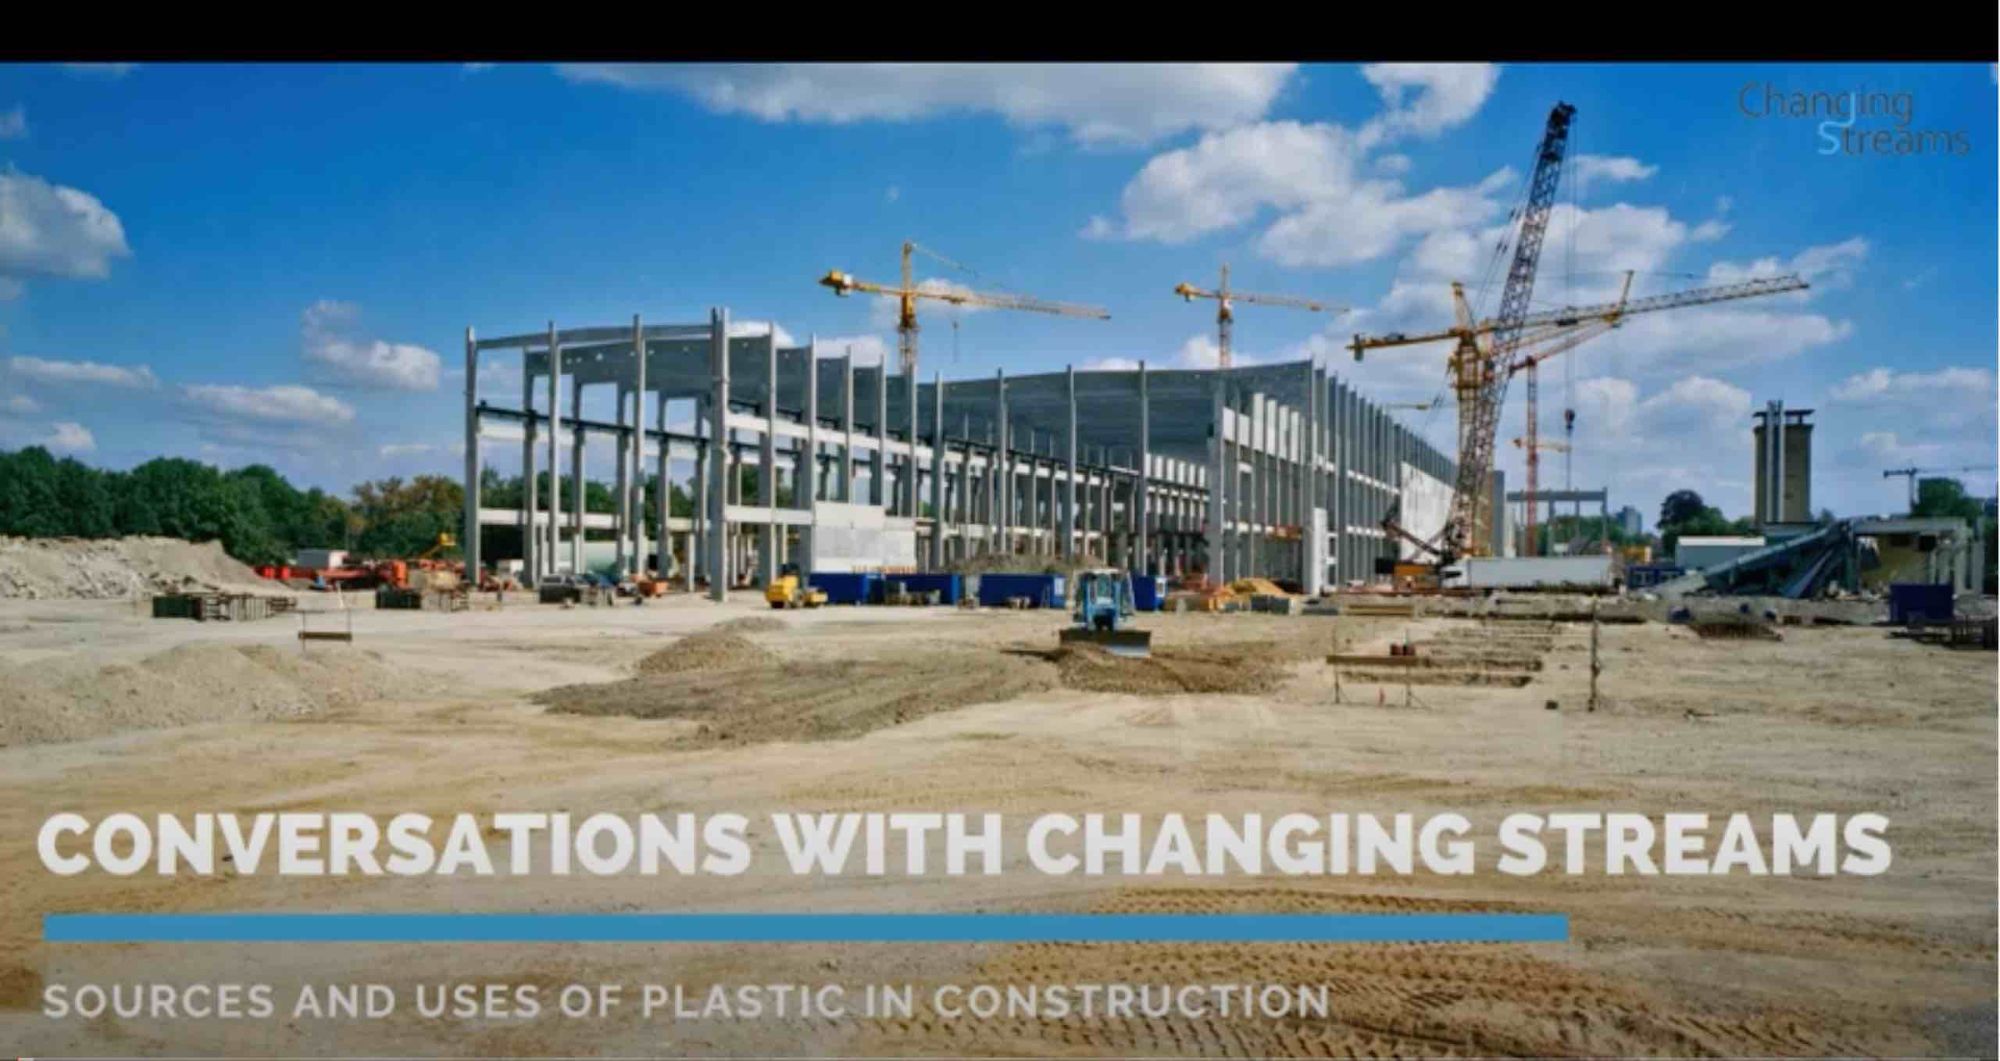 Changing Streams panel discussion 'Sources and Uses of Plastic in Construction' - July 2021